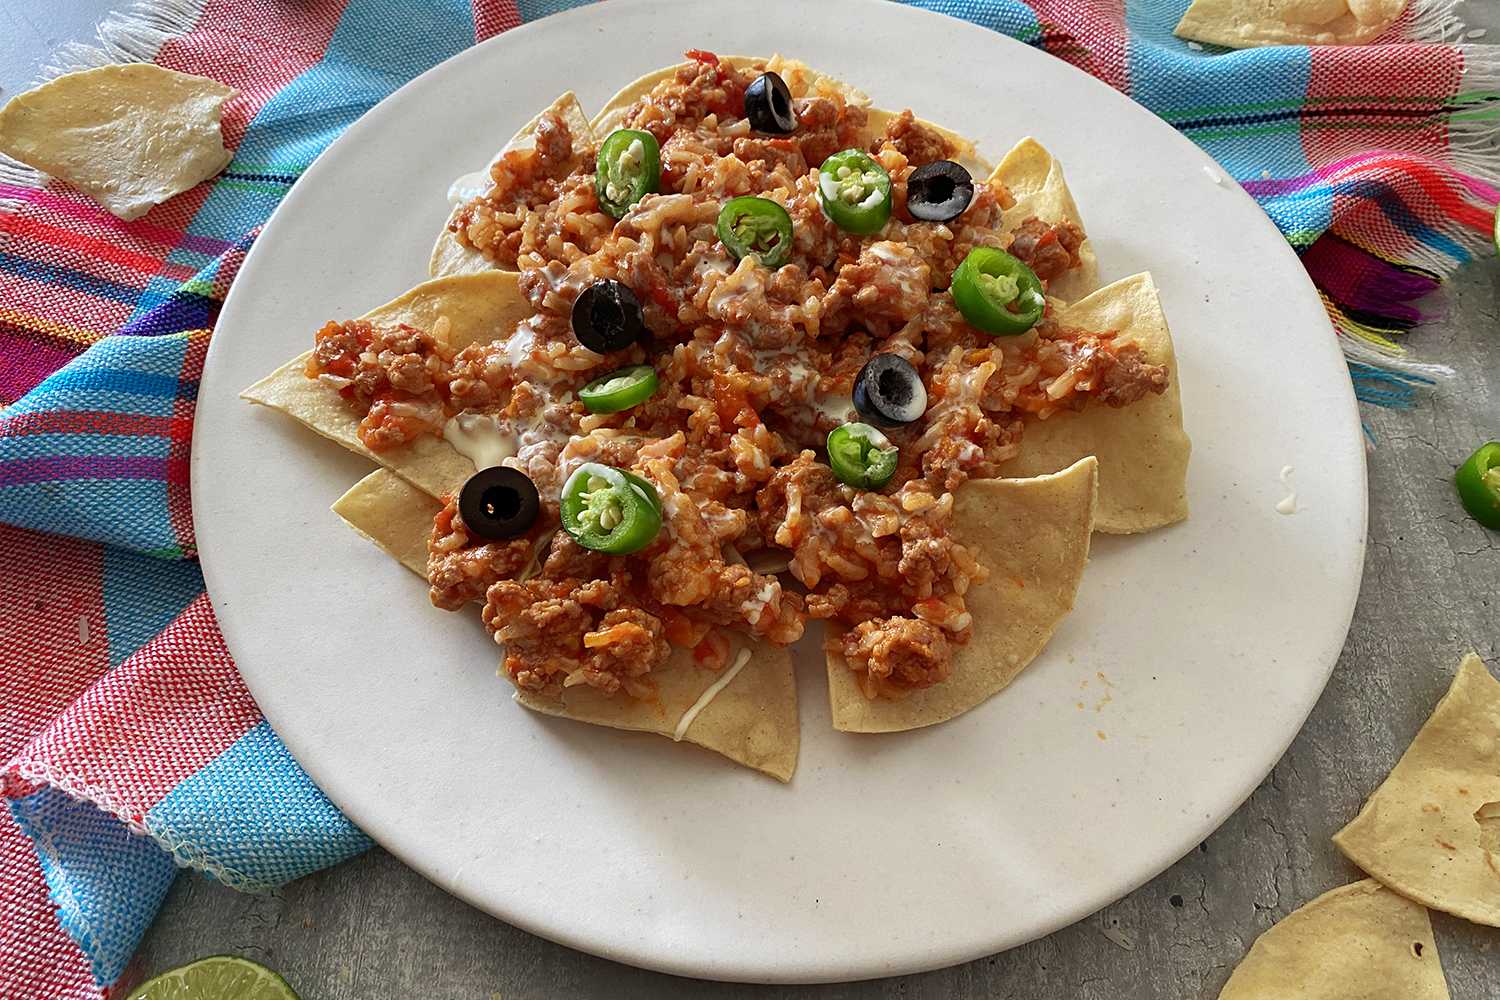 Nachos with ground beef with sauce topped with black ollives and chopped green chiles